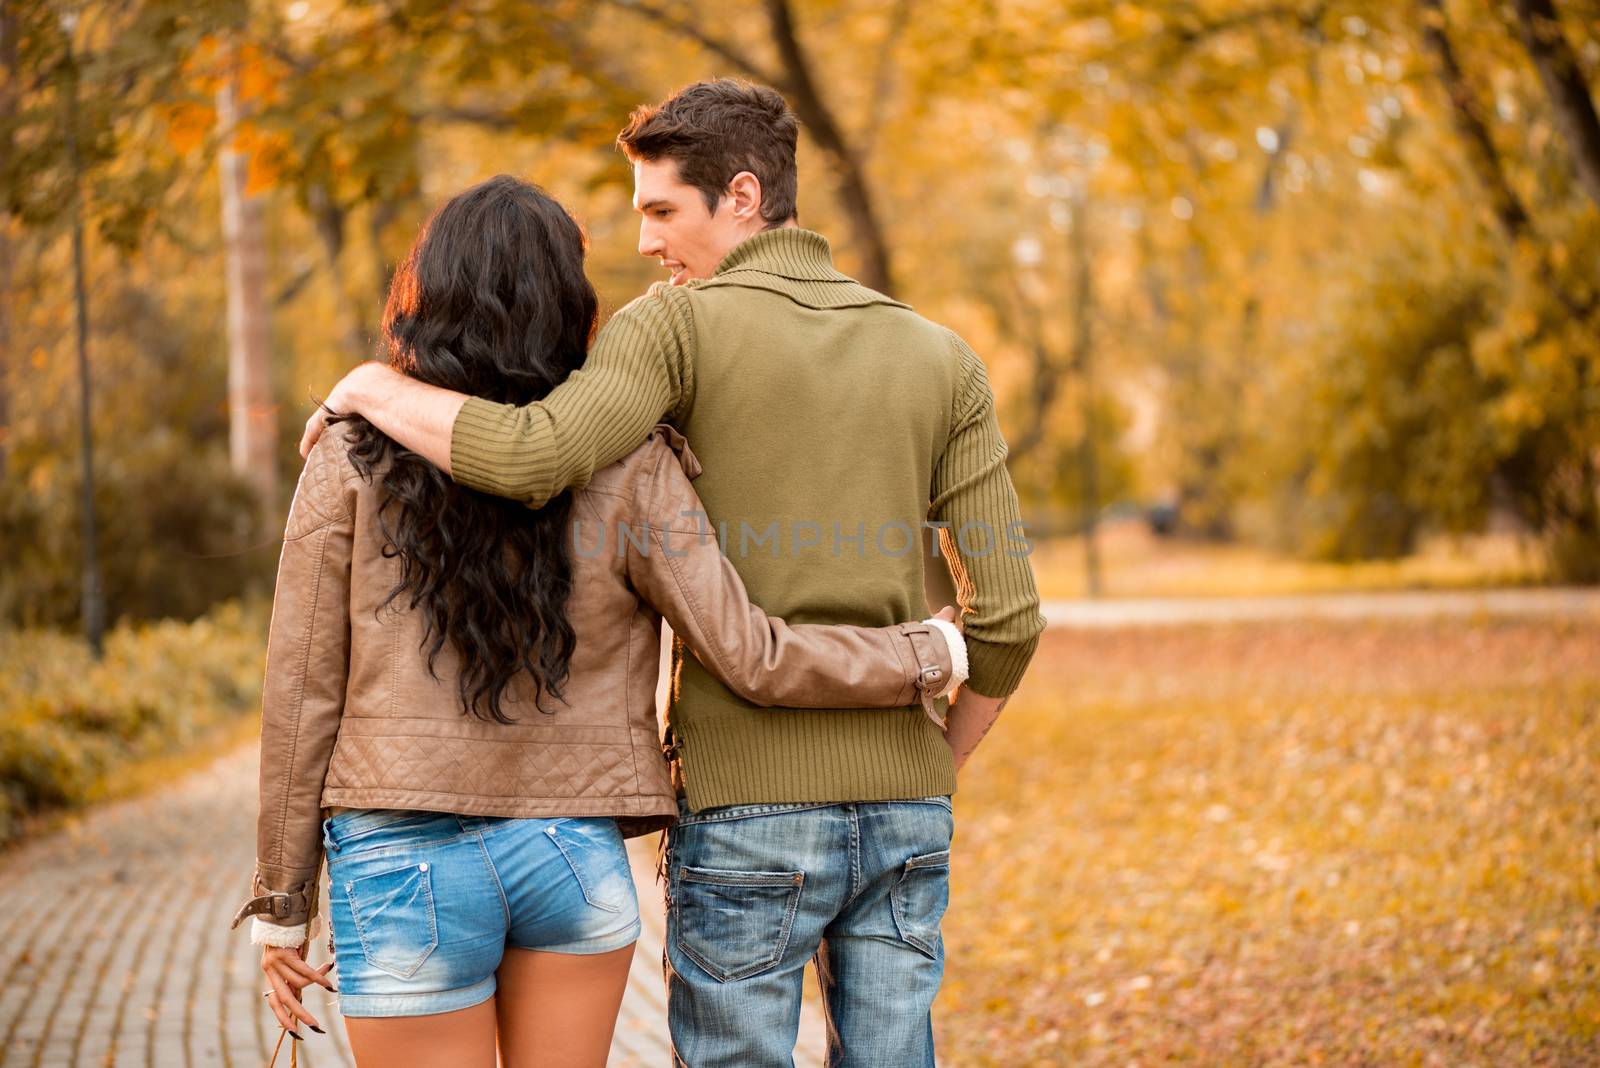 Loving young couple walking and enjoying autumn day in the park.